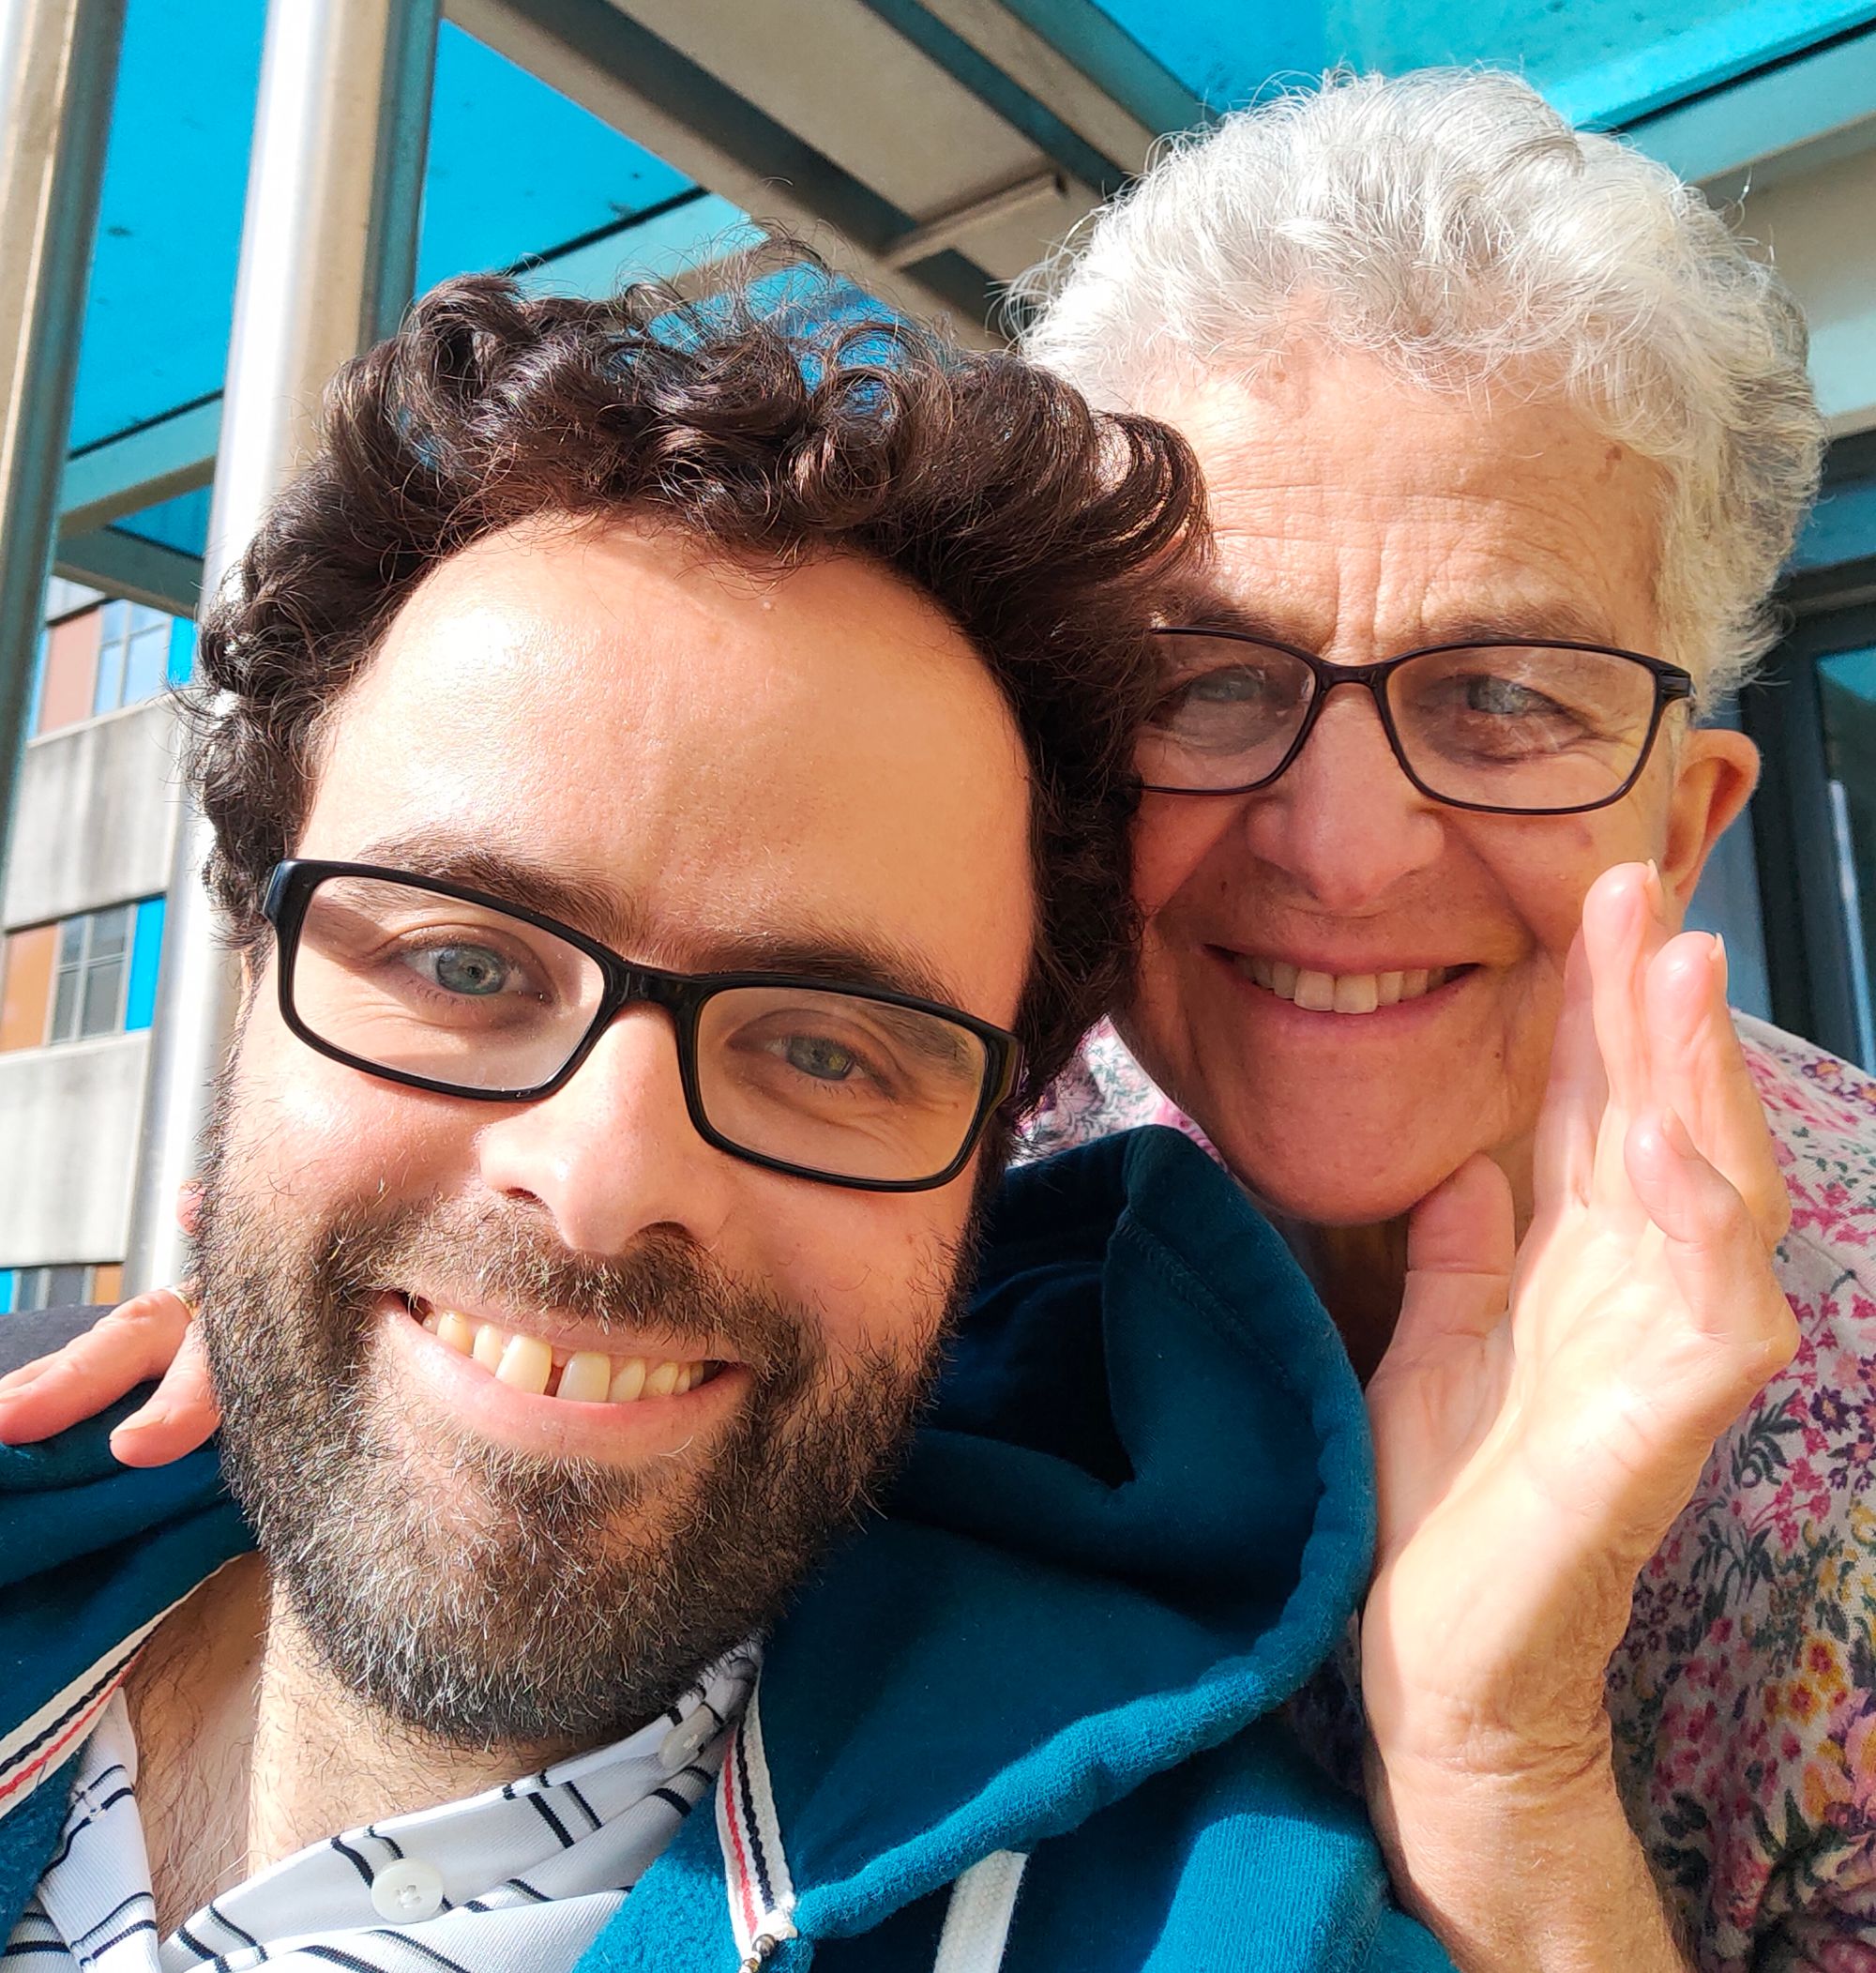 A smiling selfie of Peter and his Mother. They are both white, and share similar eyes, nose and curly hair. Peter has glasses and a beard. Mummy Fremlin has white hair, glasses, one hand on his shoulder and the other held vertically as a hello. 